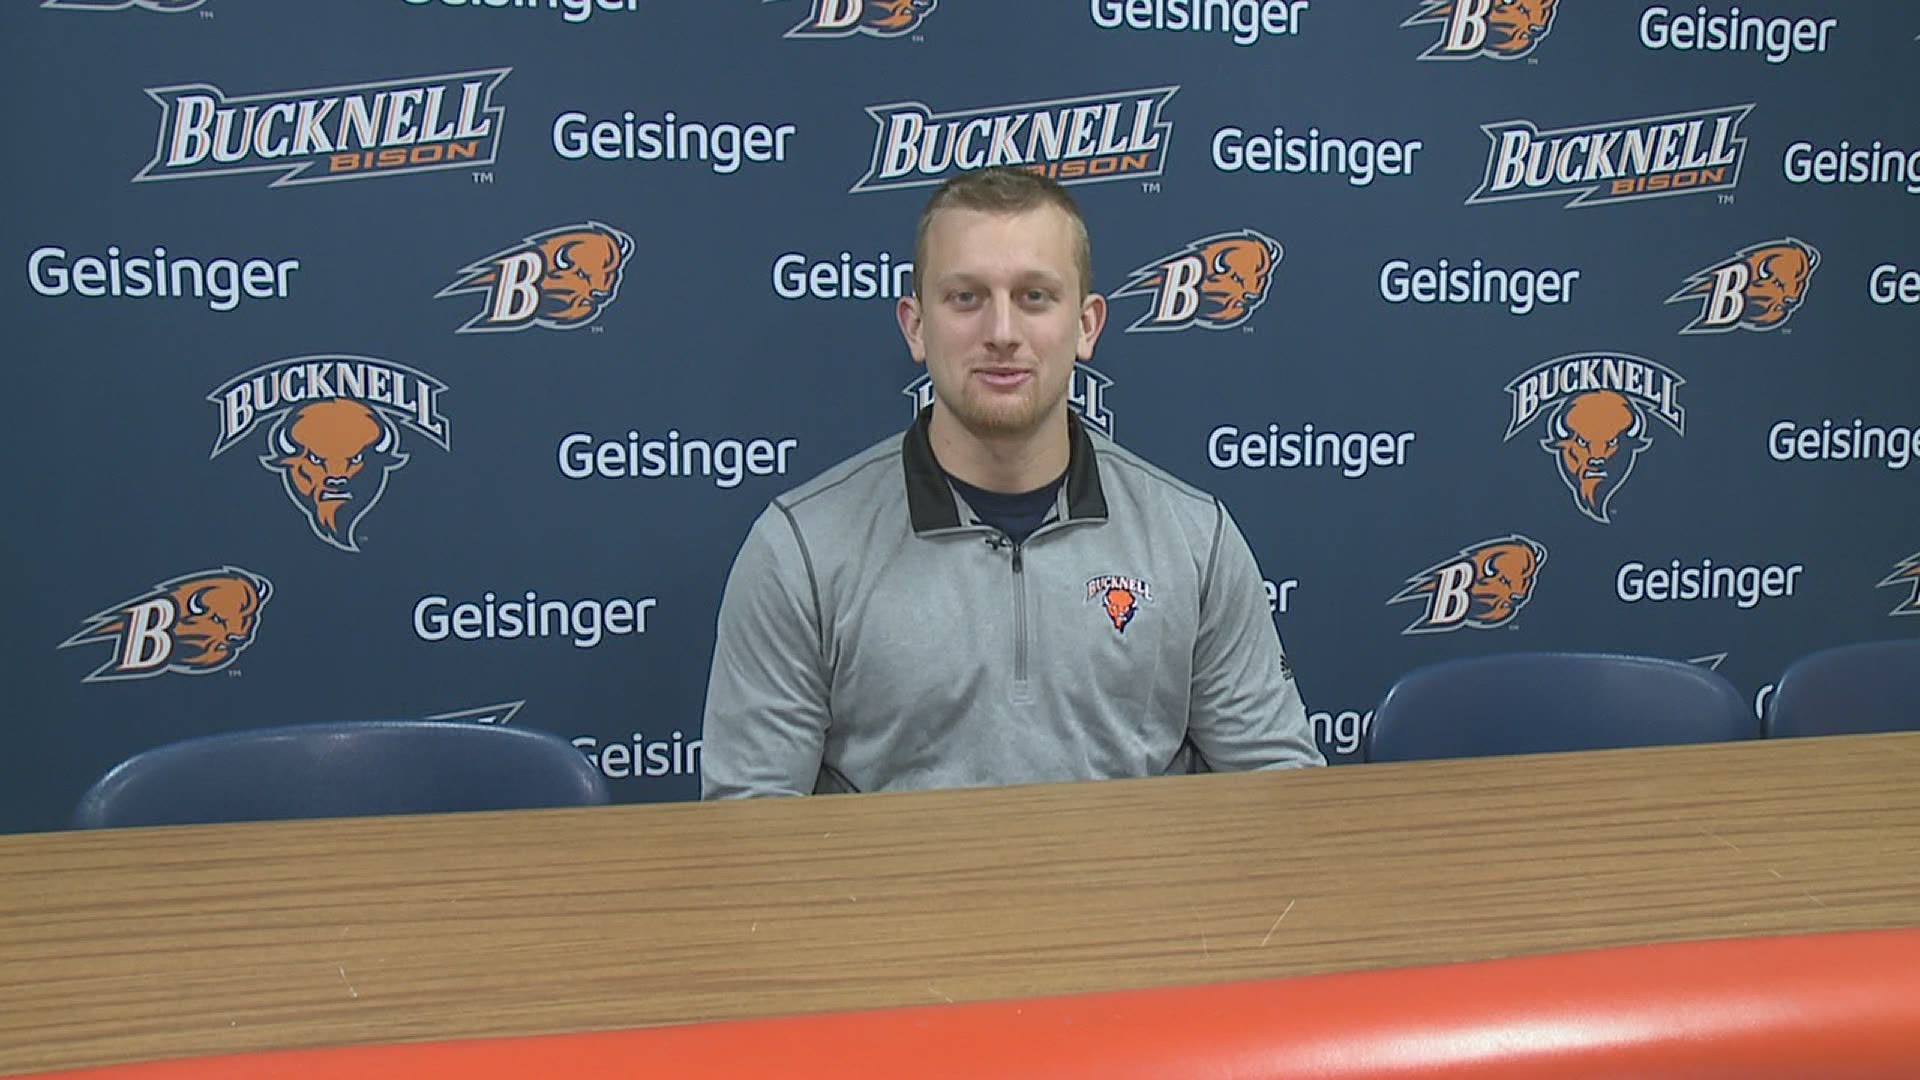 Bucknell Senior Punter will attend the NFL Combine in hopes of playing in the NFL